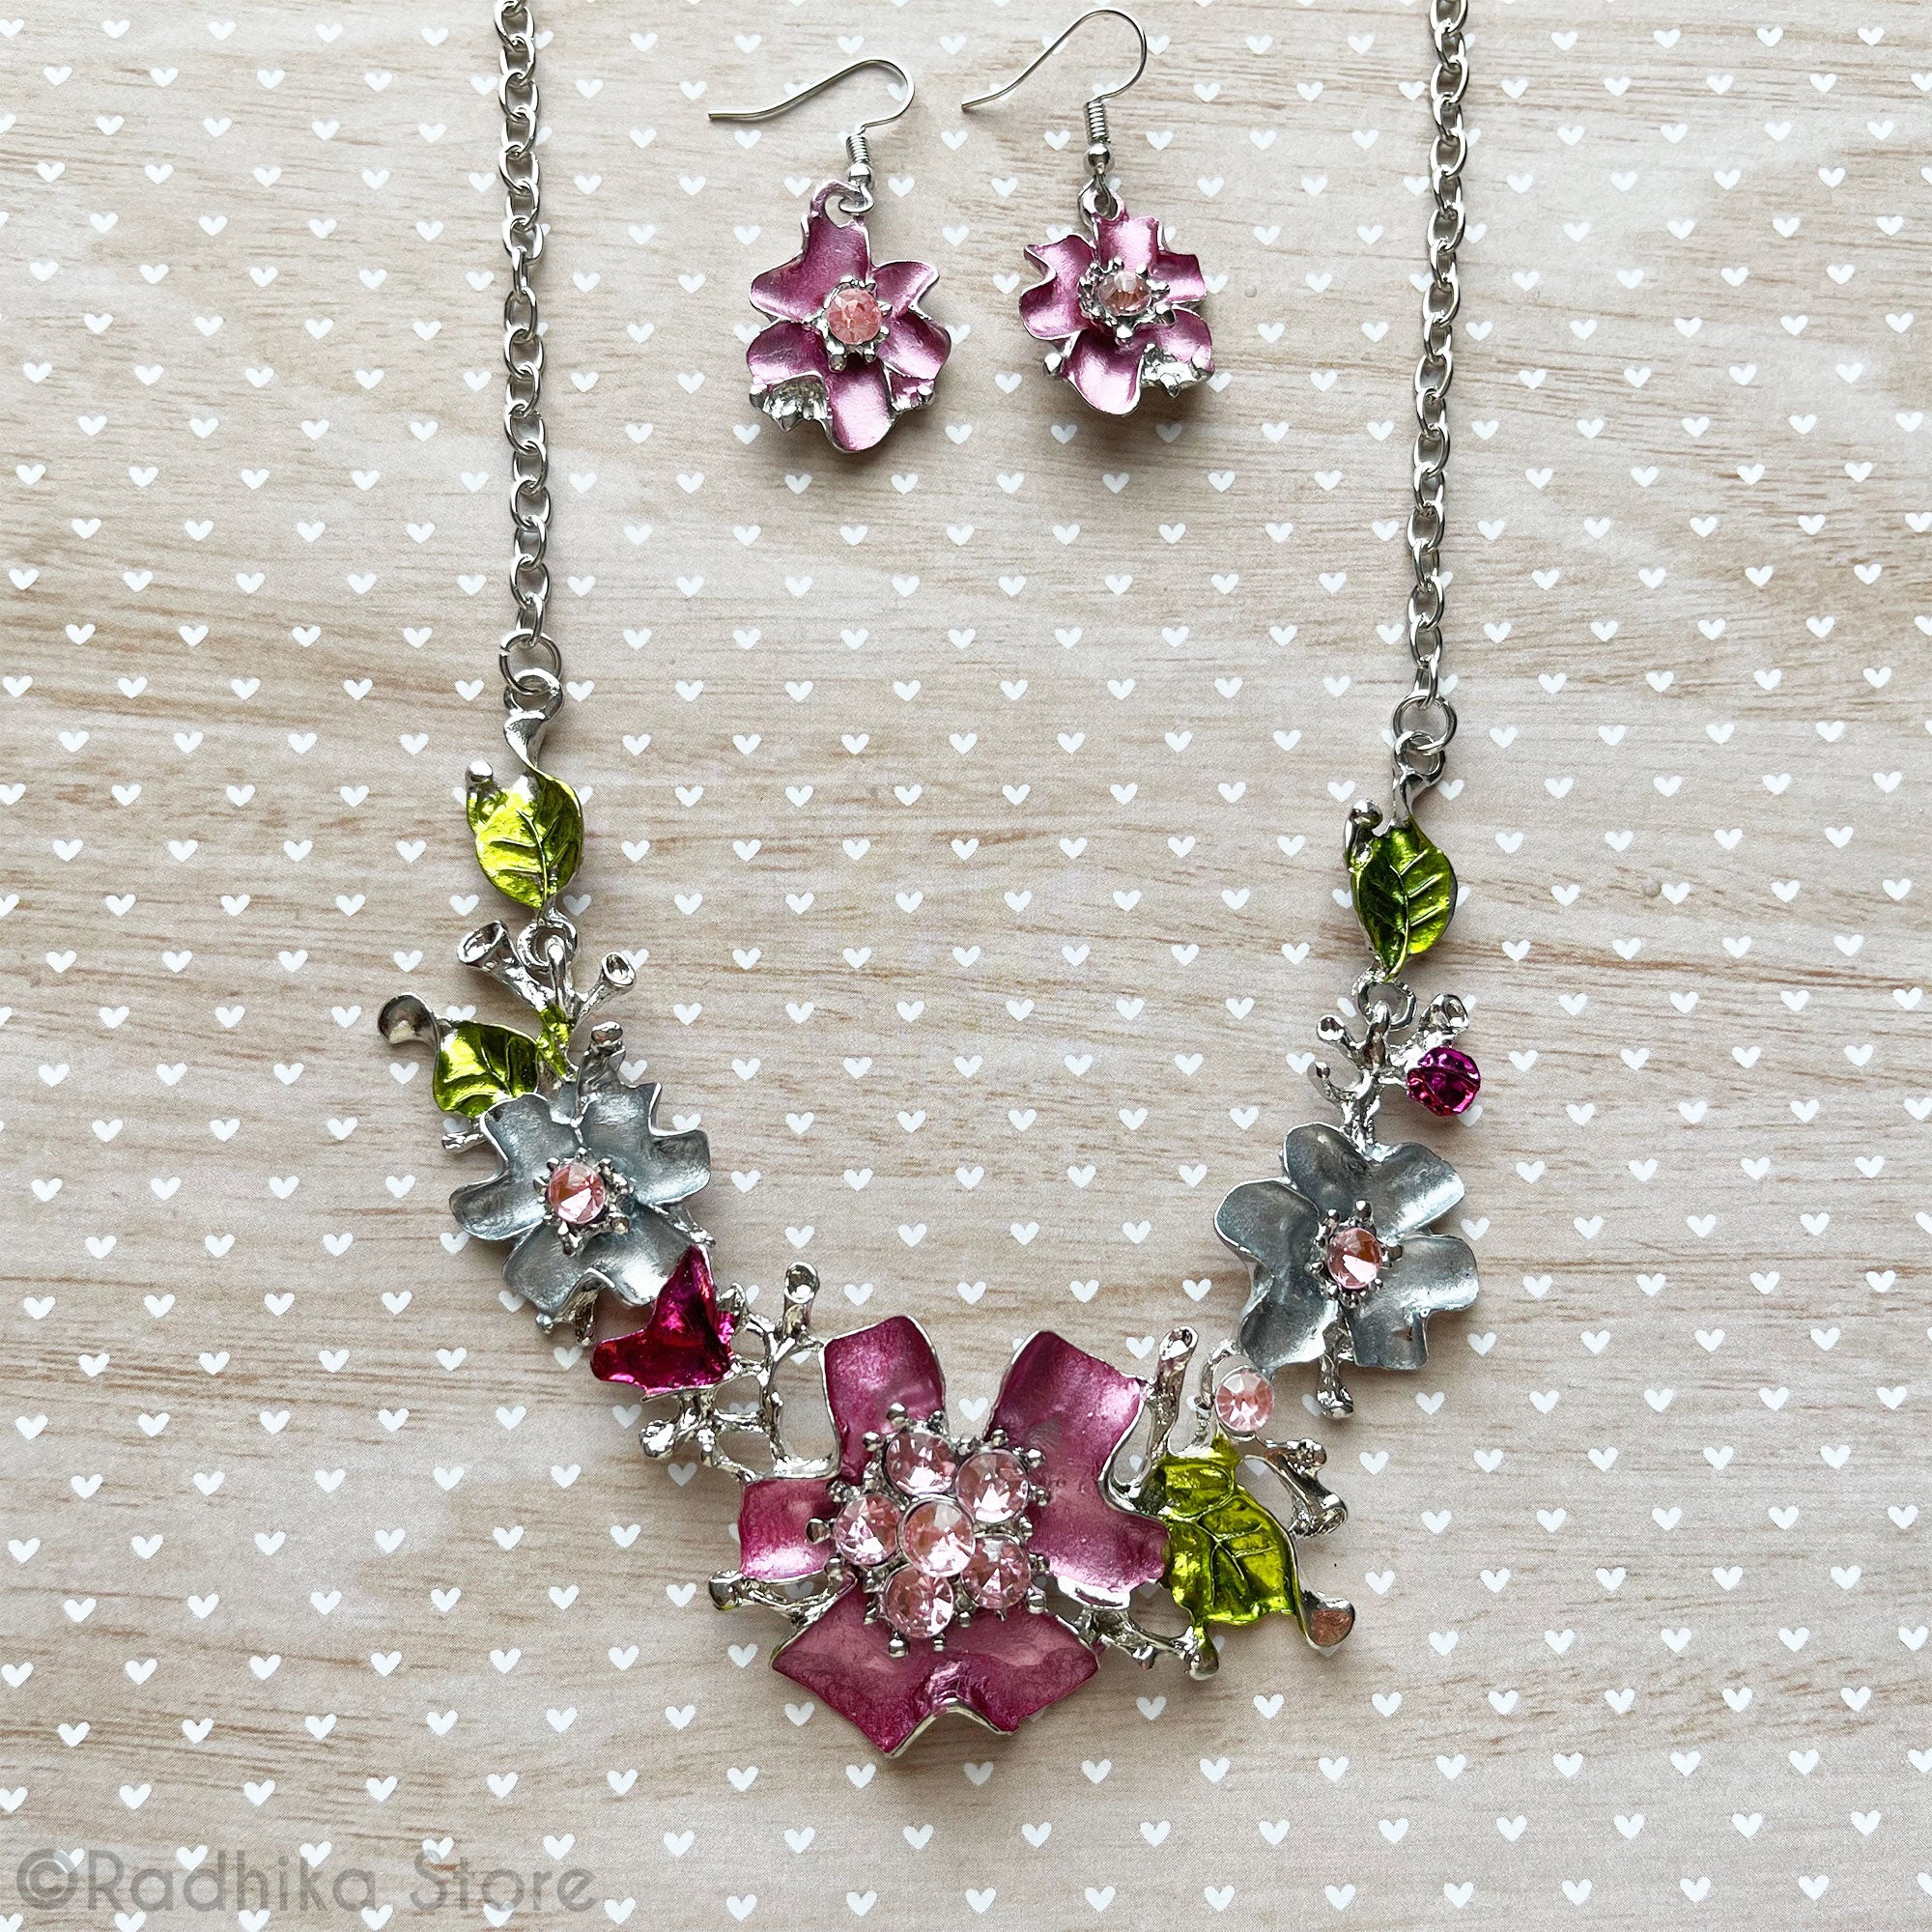 Blooming Flowers- Deity Necklaces and Earring Set